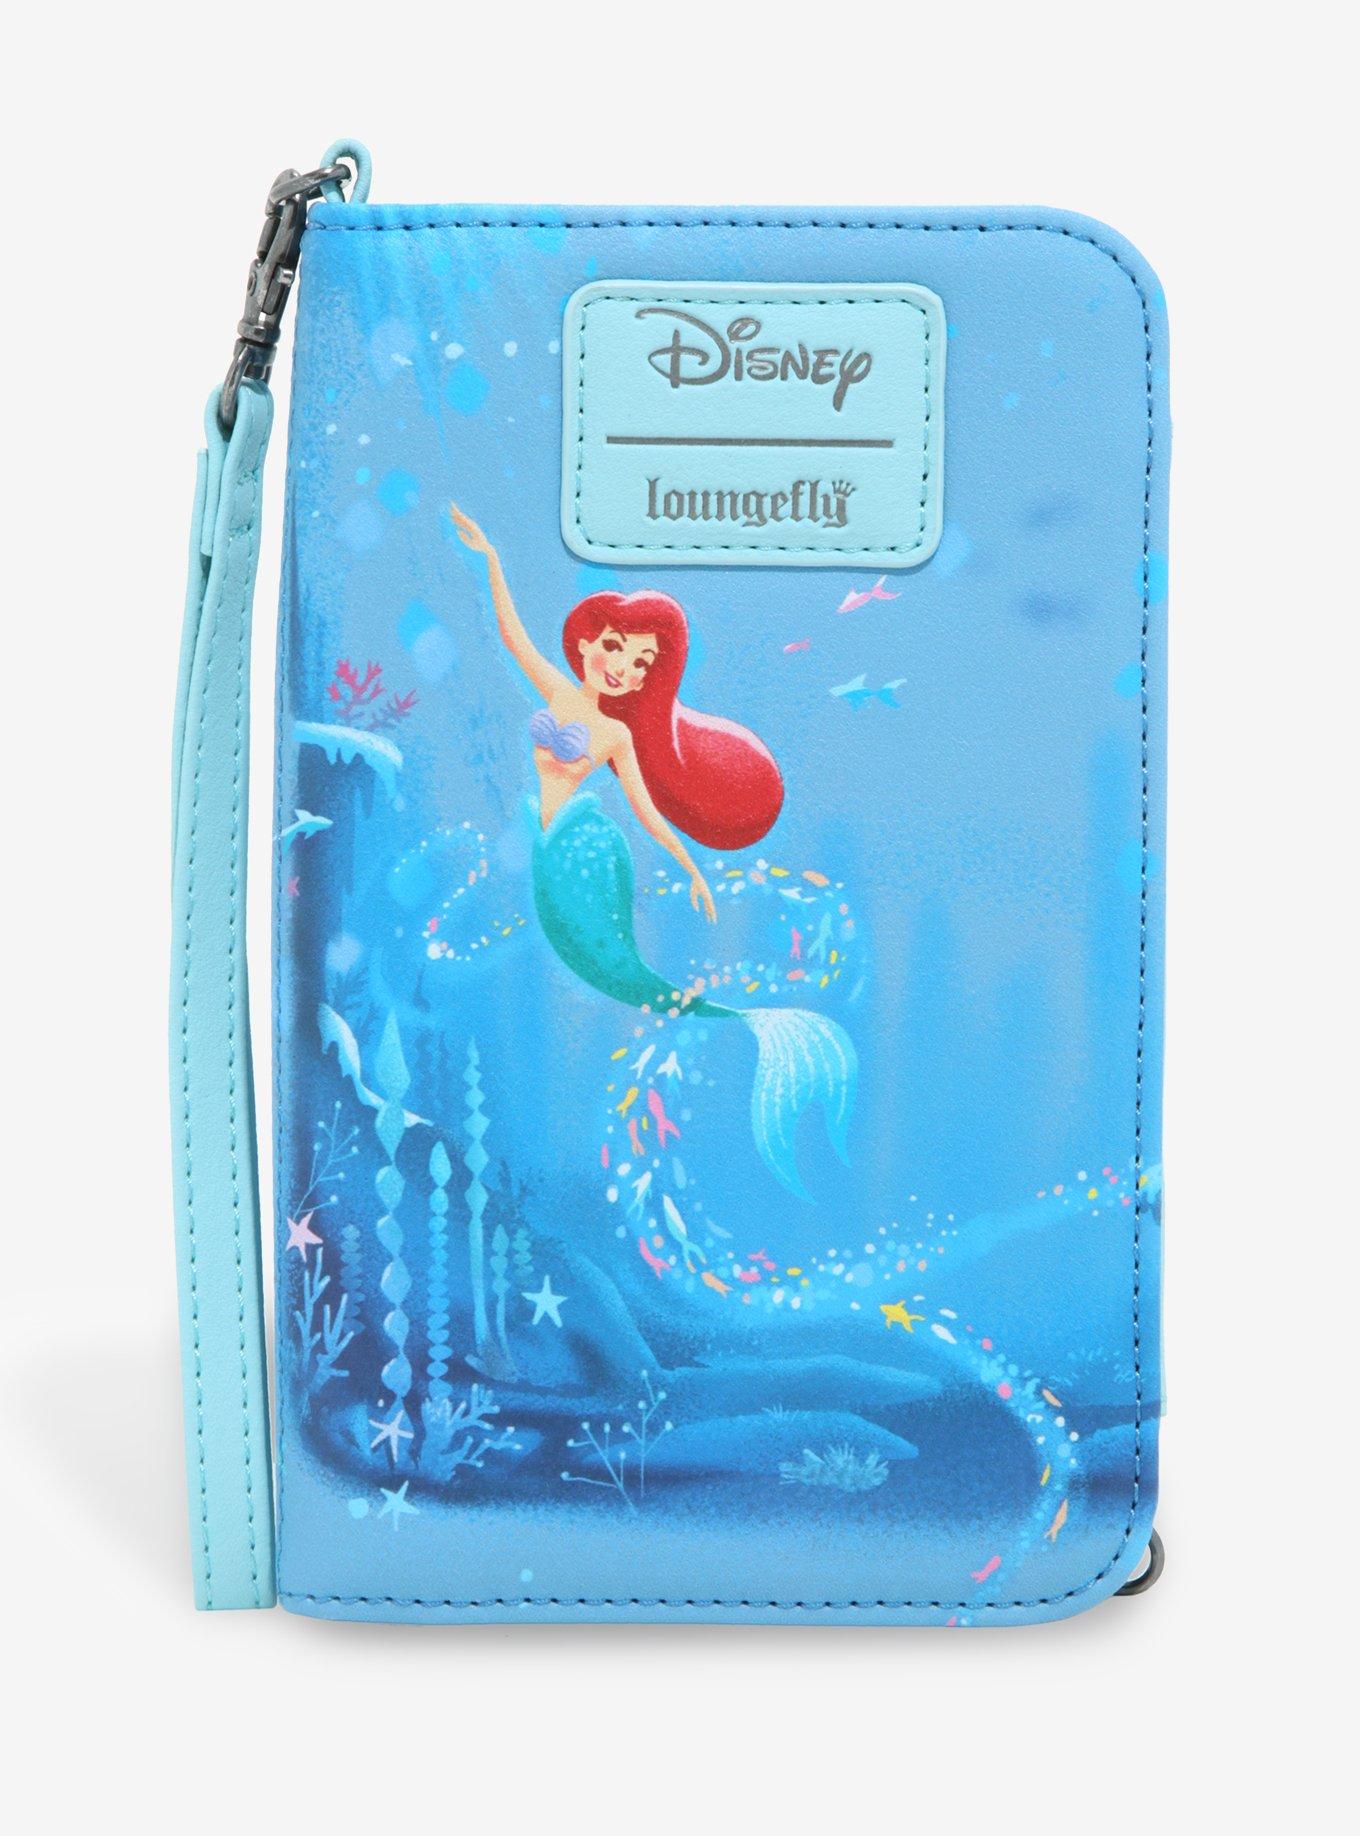 Buy The Little Mermaid Live Action Flap Wallet at Loungefly.